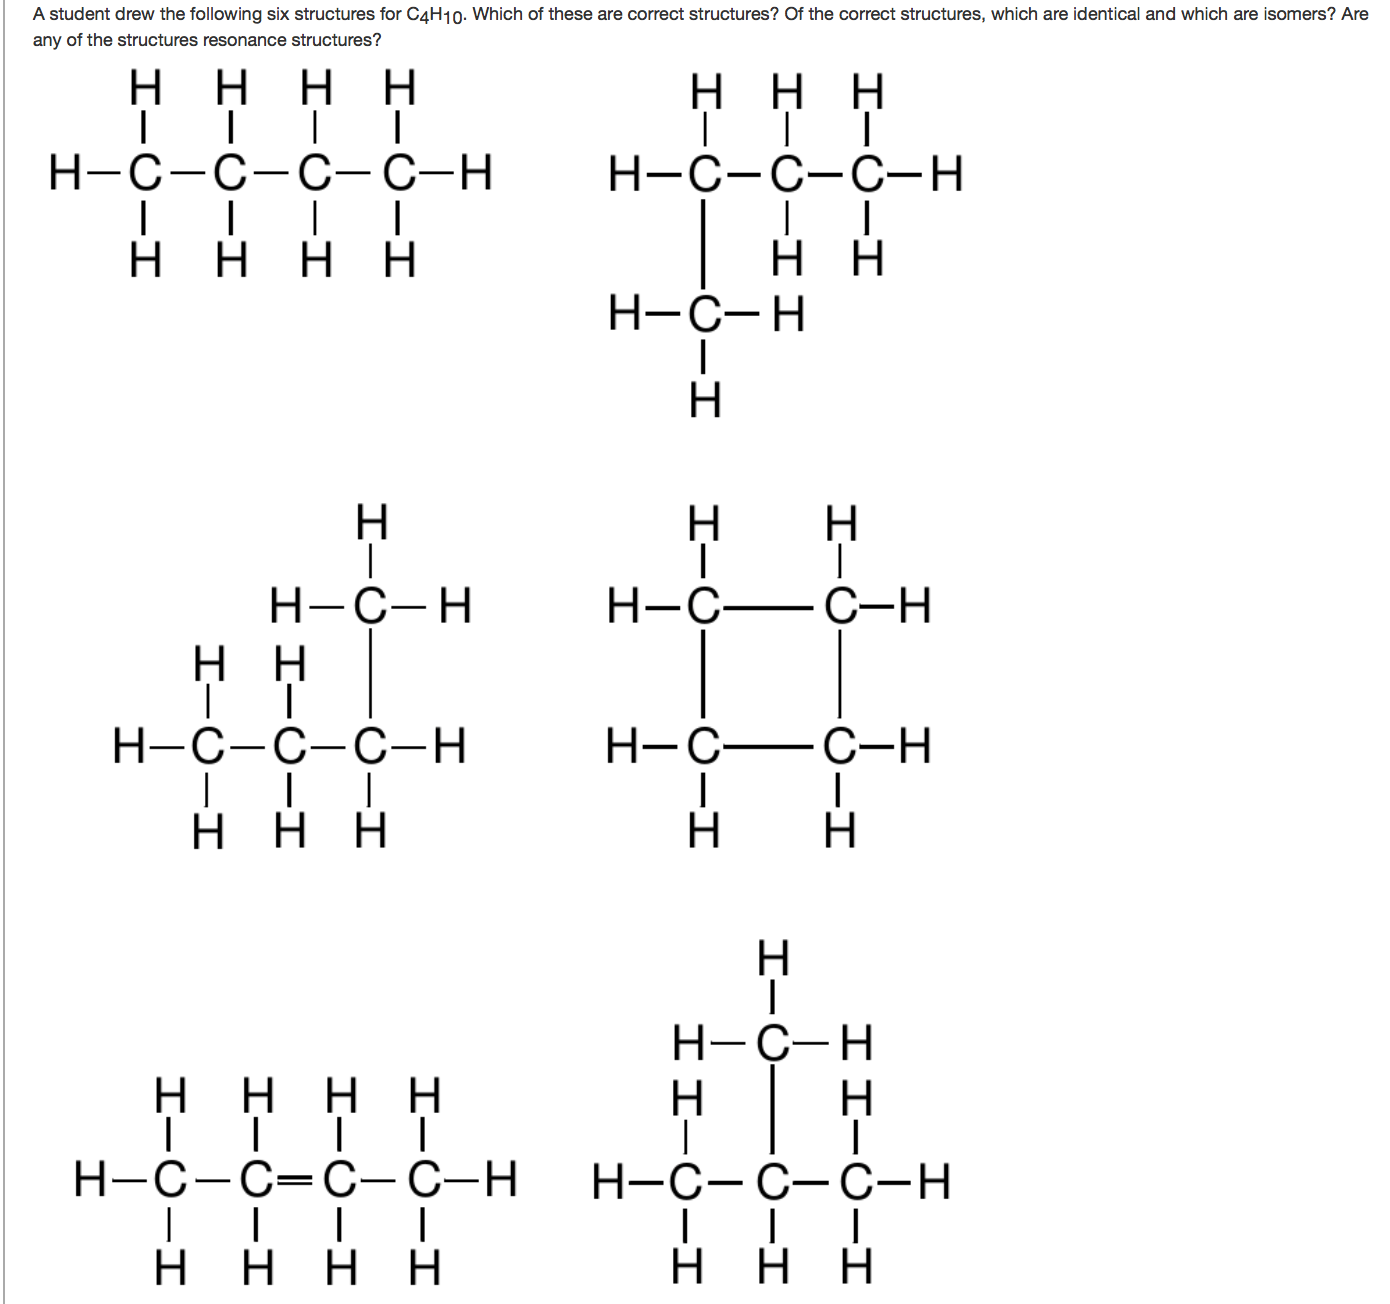 C5h10 is the molecular formula of 13 hydrocarbon isomers (represented by th...